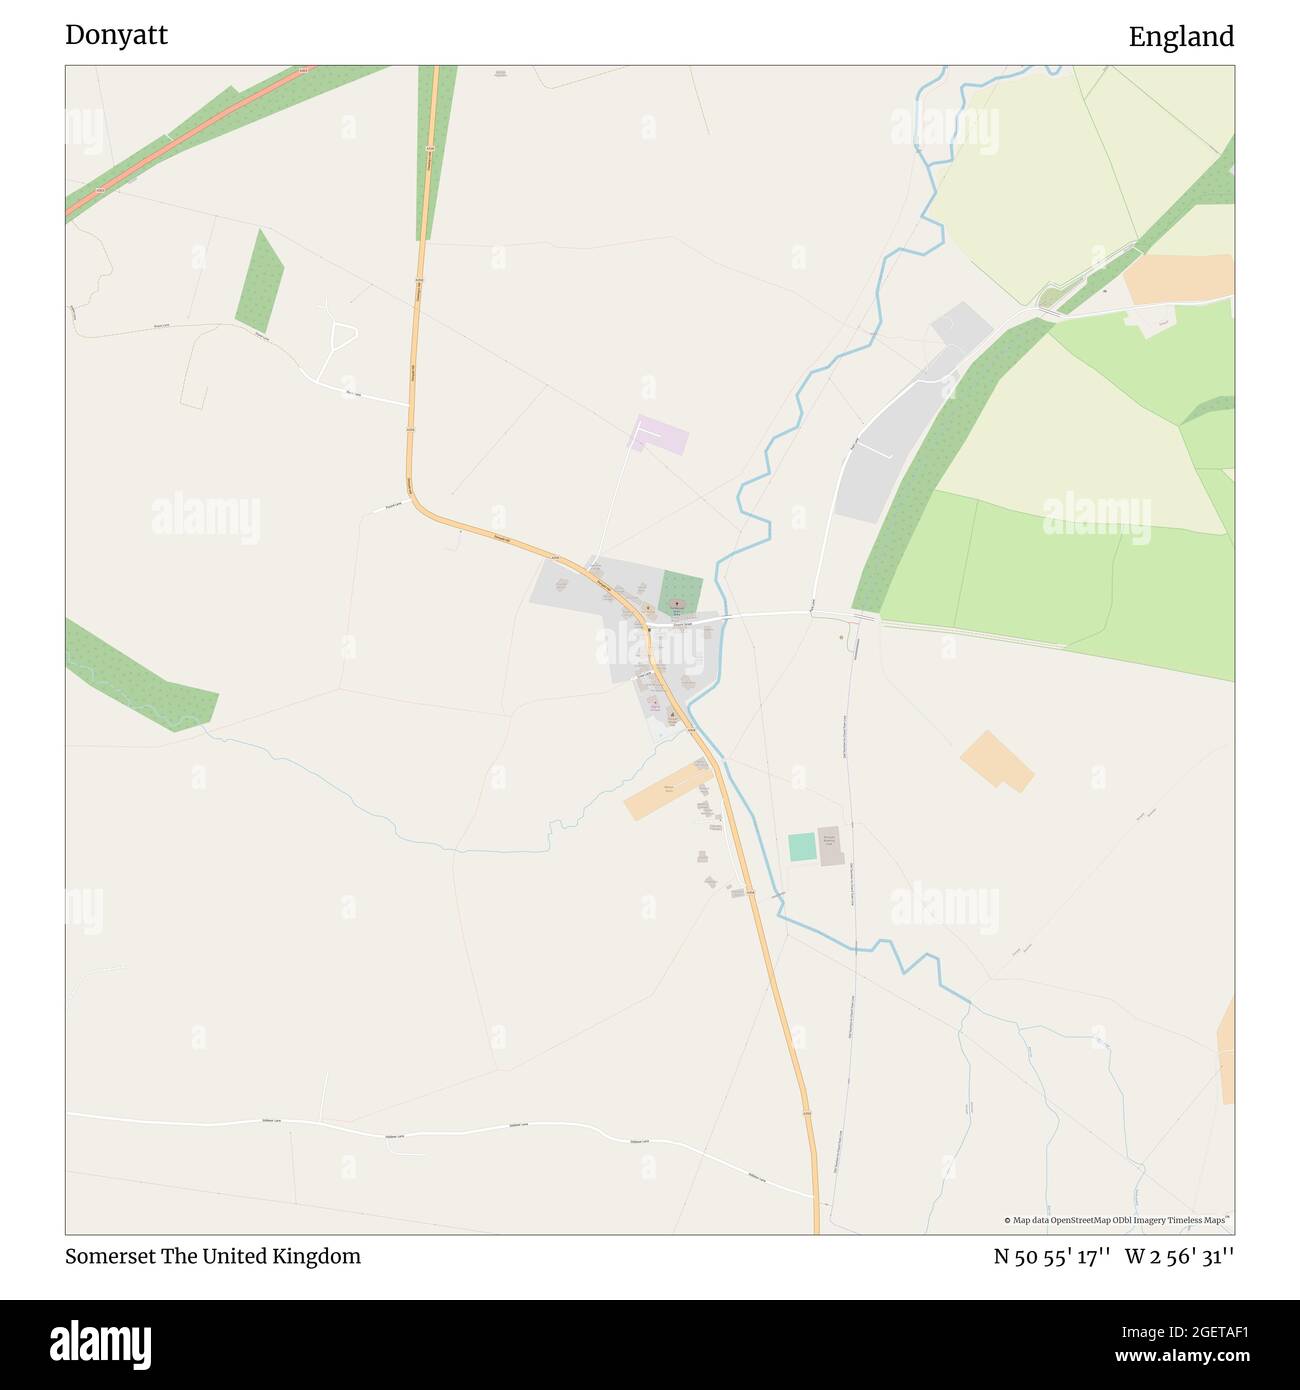 Donyatt, Somerset, United Kingdom, England, N 50 55' 17'', W 2 56' 31'', map, Timeless Map published in 2021. Travelers, explorers and adventurers like Florence Nightingale, David Livingstone, Ernest Shackleton, Lewis and Clark and Sherlock Holmes relied on maps to plan travels to the world's most remote corners, Timeless Maps is mapping most locations on the globe, showing the achievement of great dreams Stock Photo